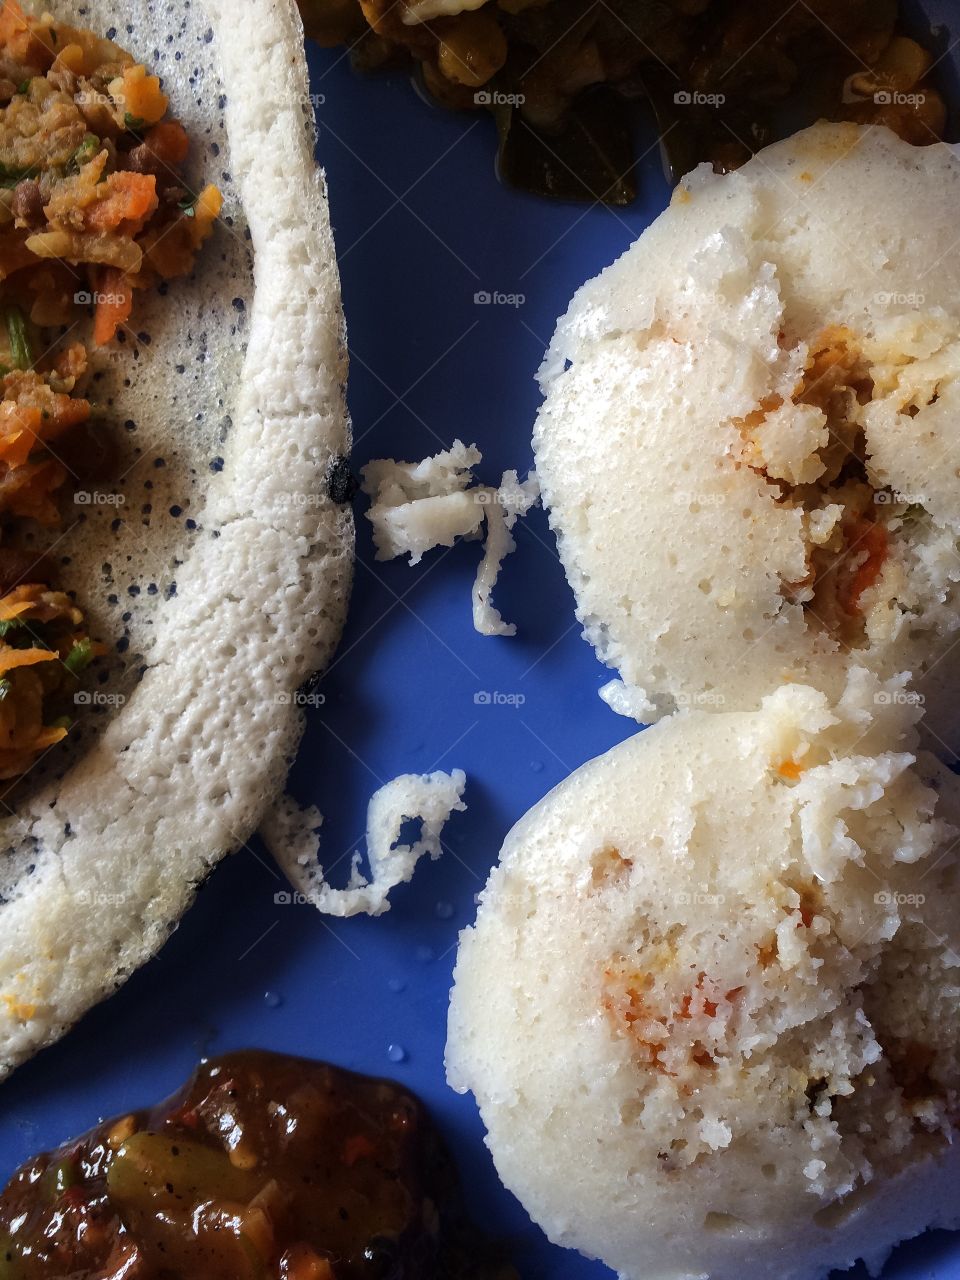 Idly and masala dosa, a South Indian breakfast